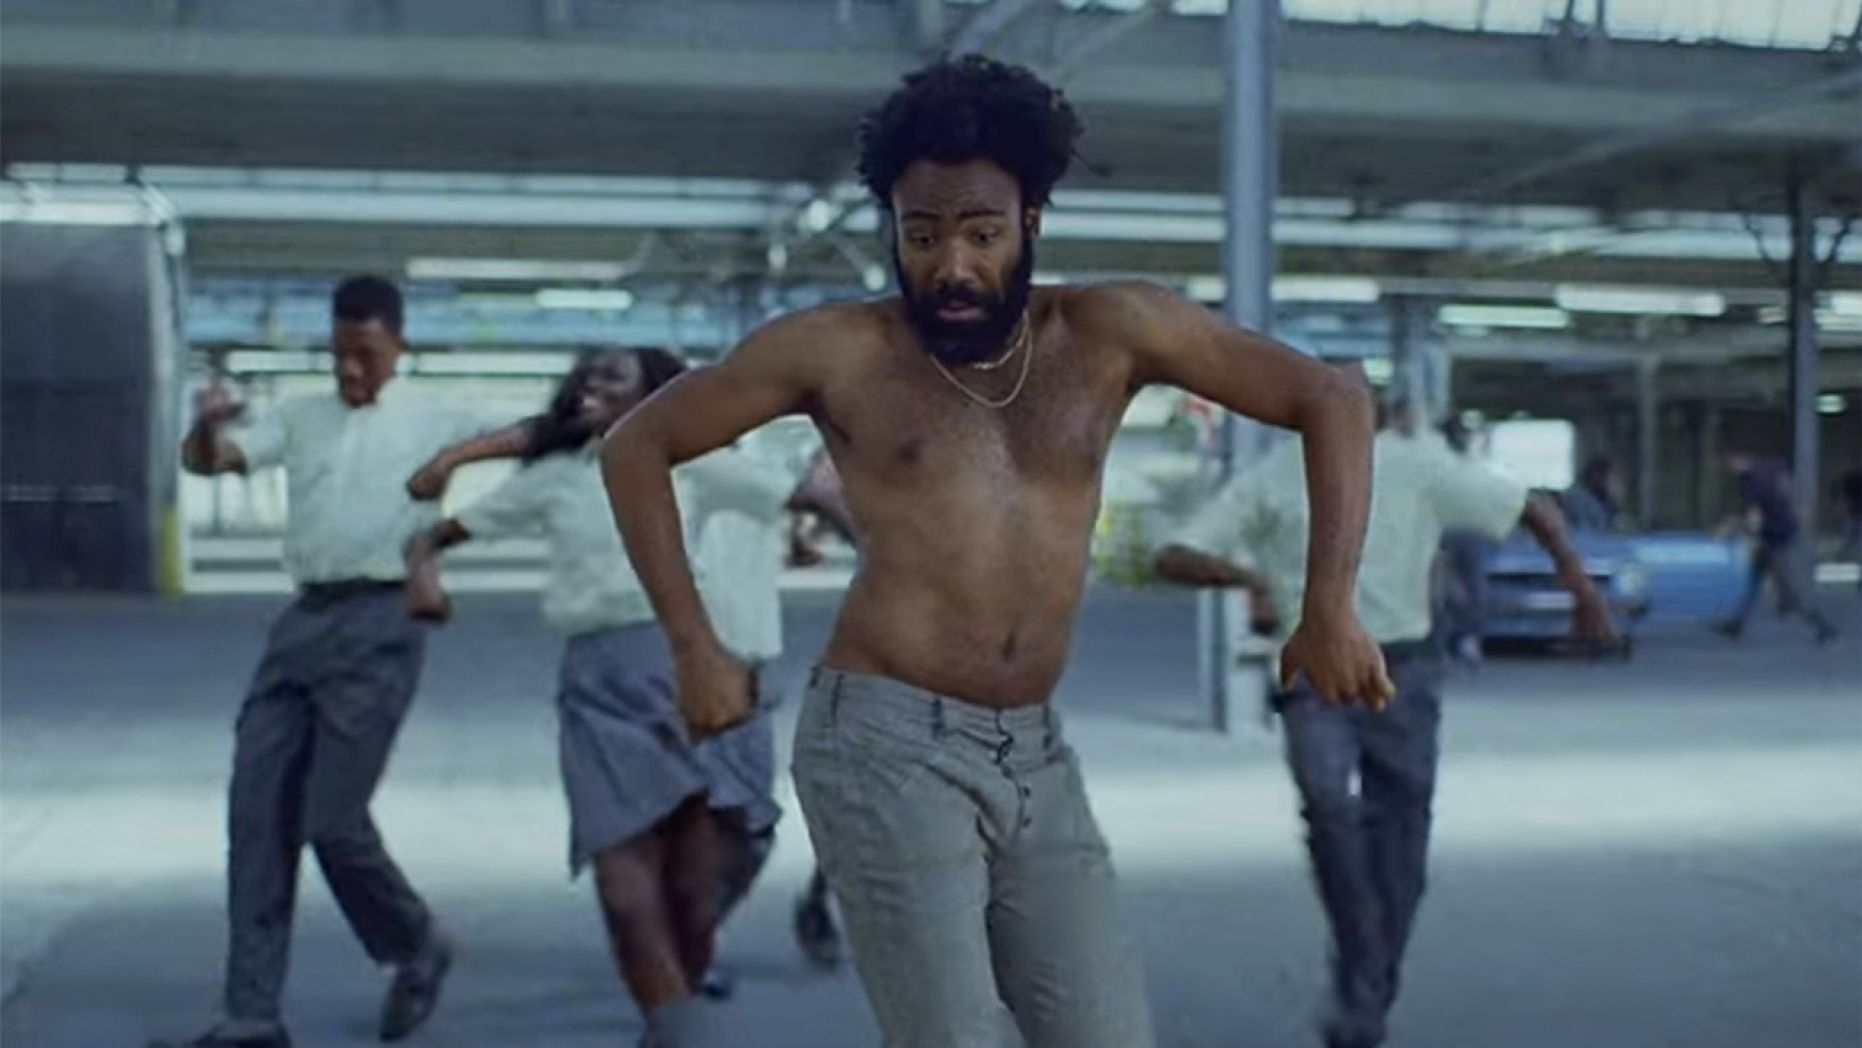 Childish Gambino’s ‘This Is America’ tops charts as debate over song, music video continues